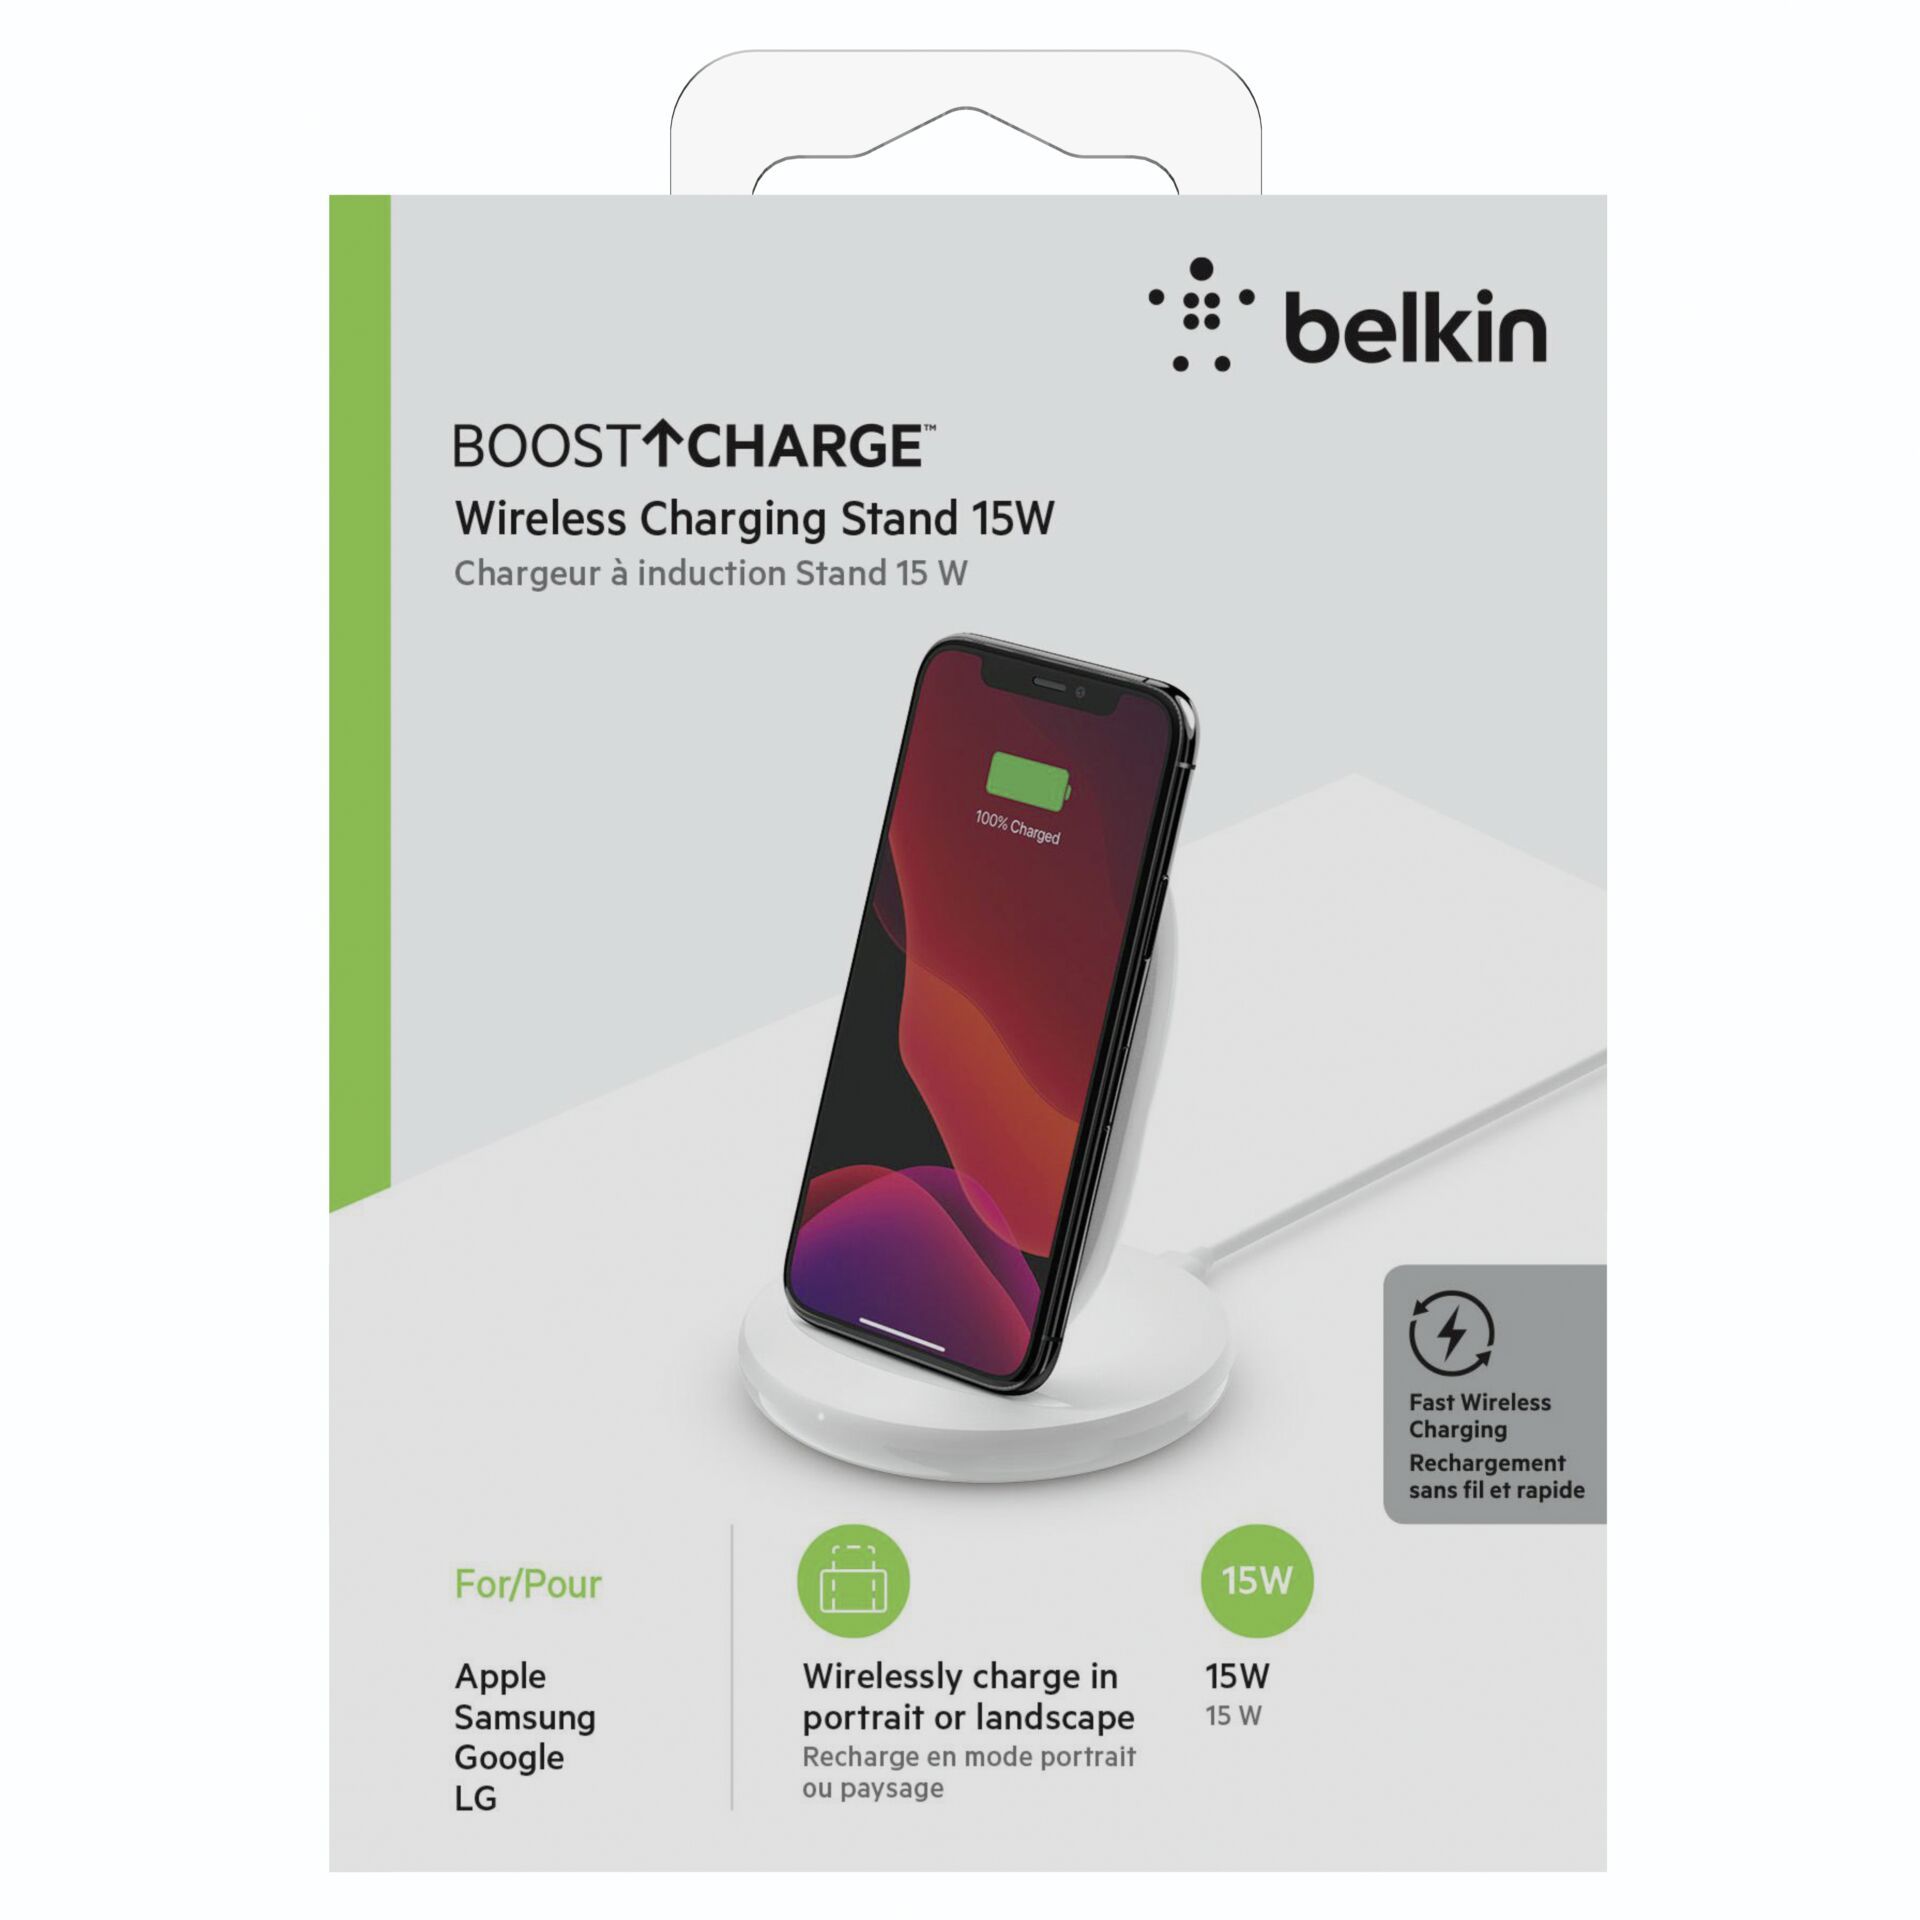 Belkin BOOST Charge Wireless Charging Stand 15W ws.WIB002vfW